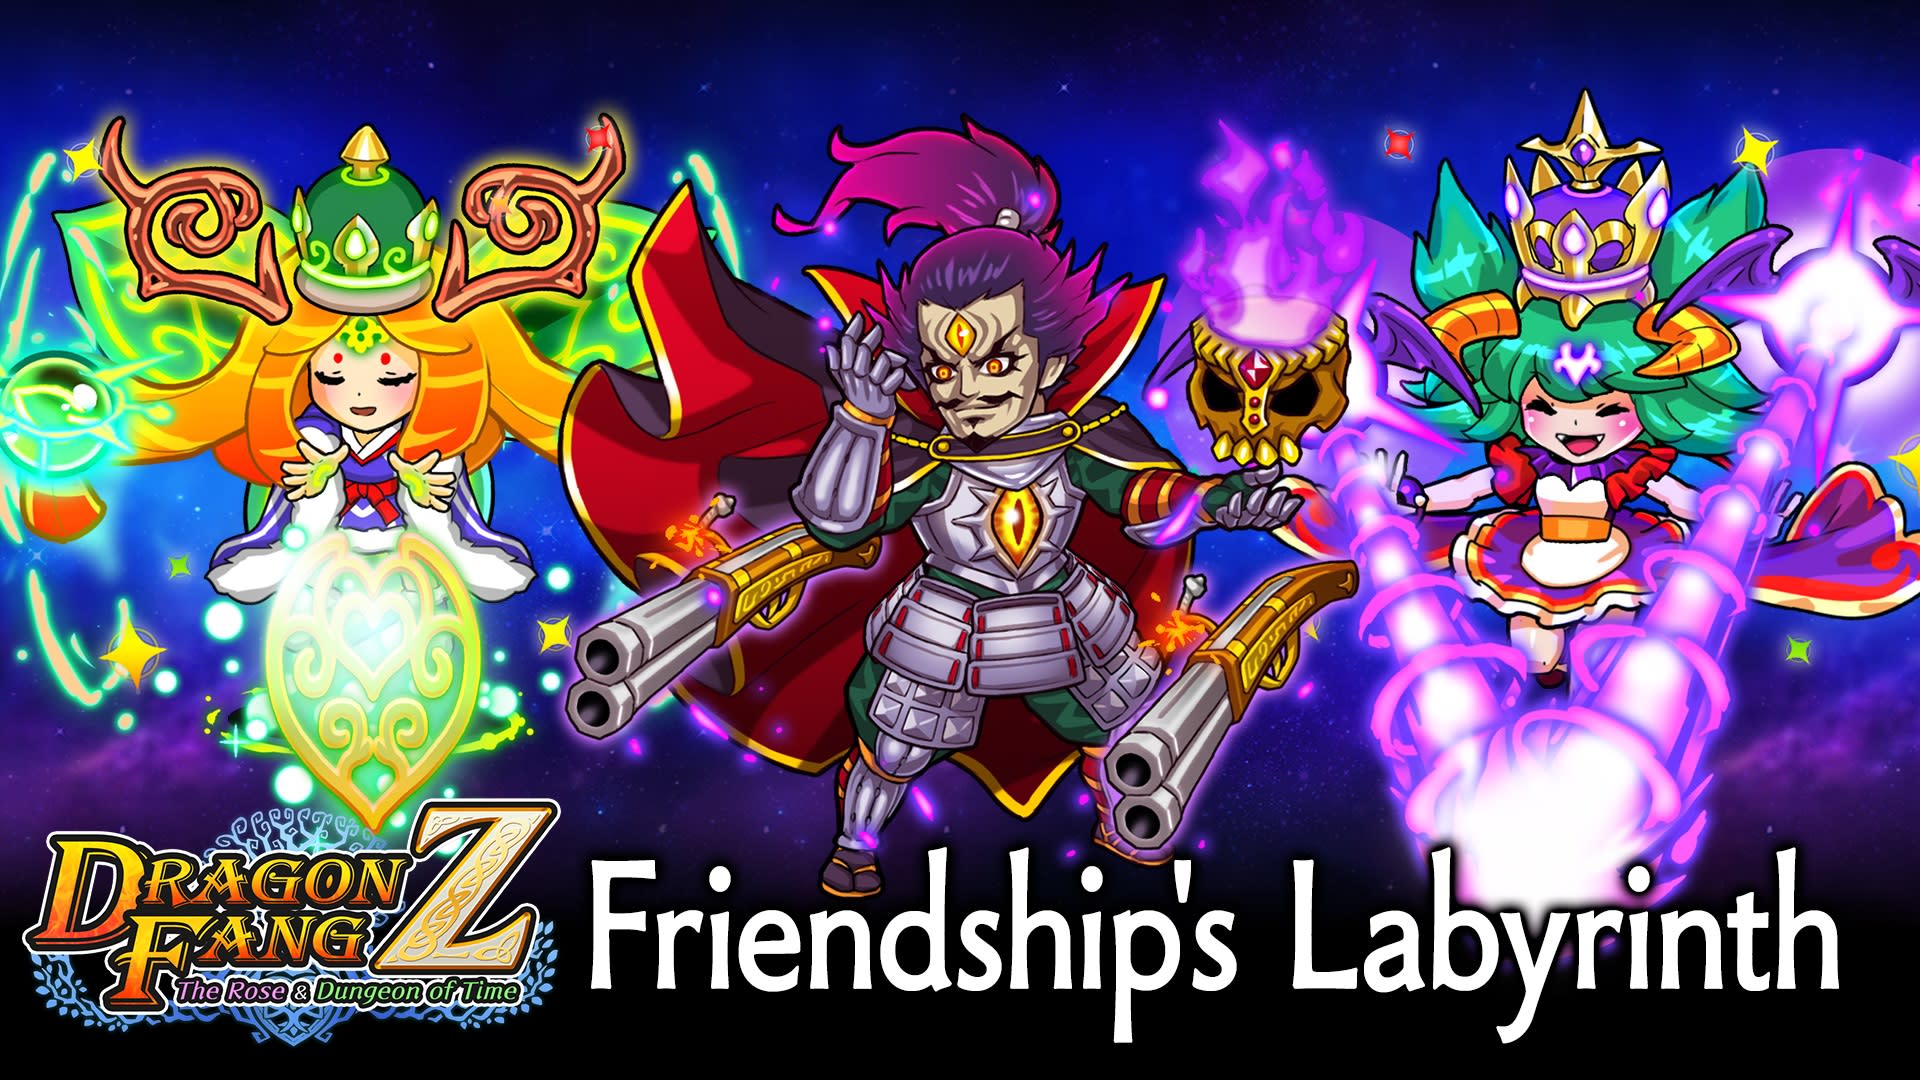 Extra Dungeon "Friendship's Labyrinth"